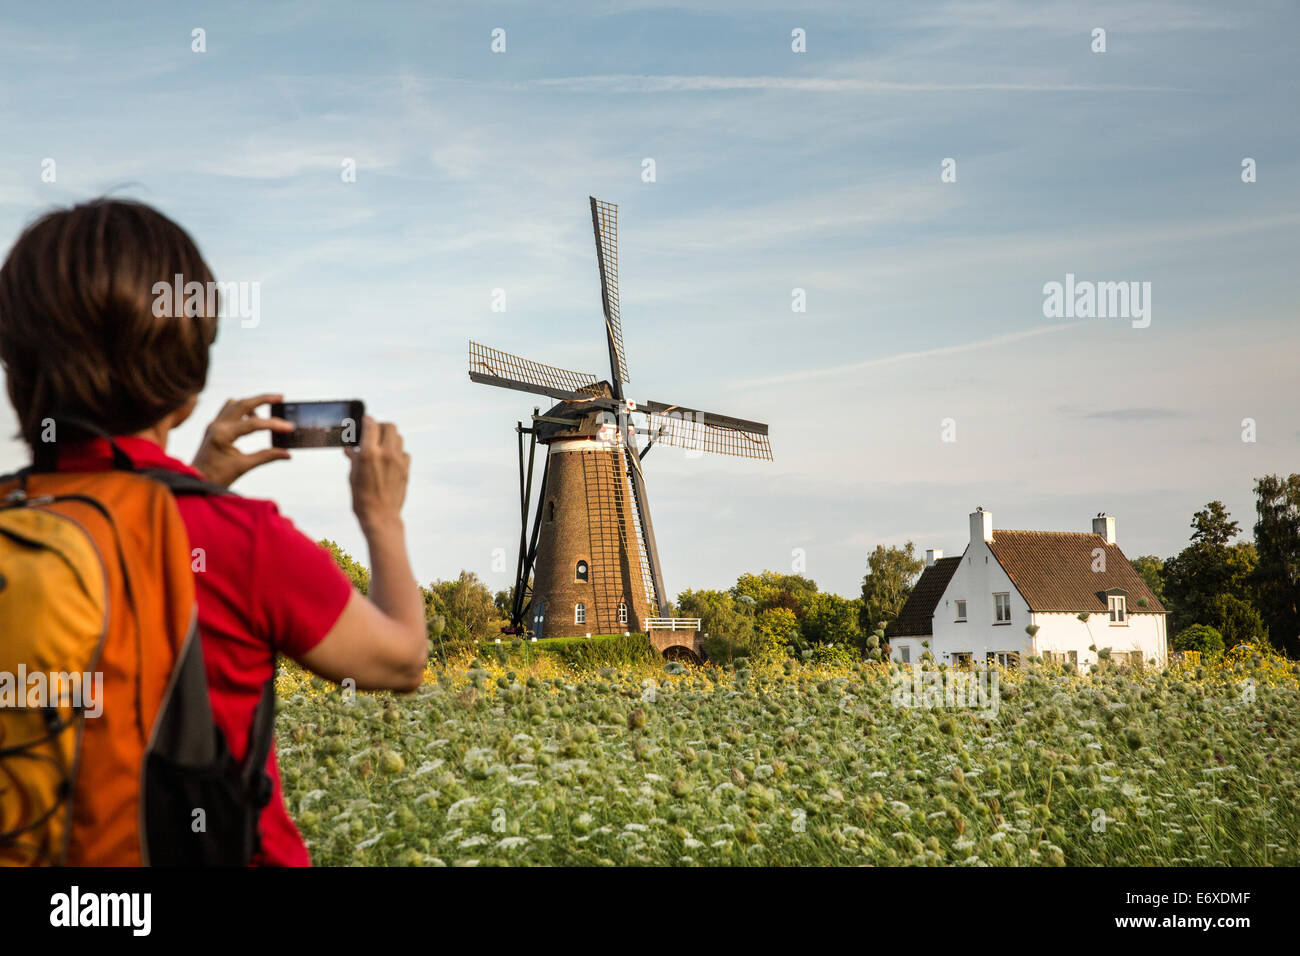 Netherlands, Nuenen, Village of Vincent van Gogh. Windmill De Roosdonck, which appears on 7 drawings. Hiker takes picture Stock Photo